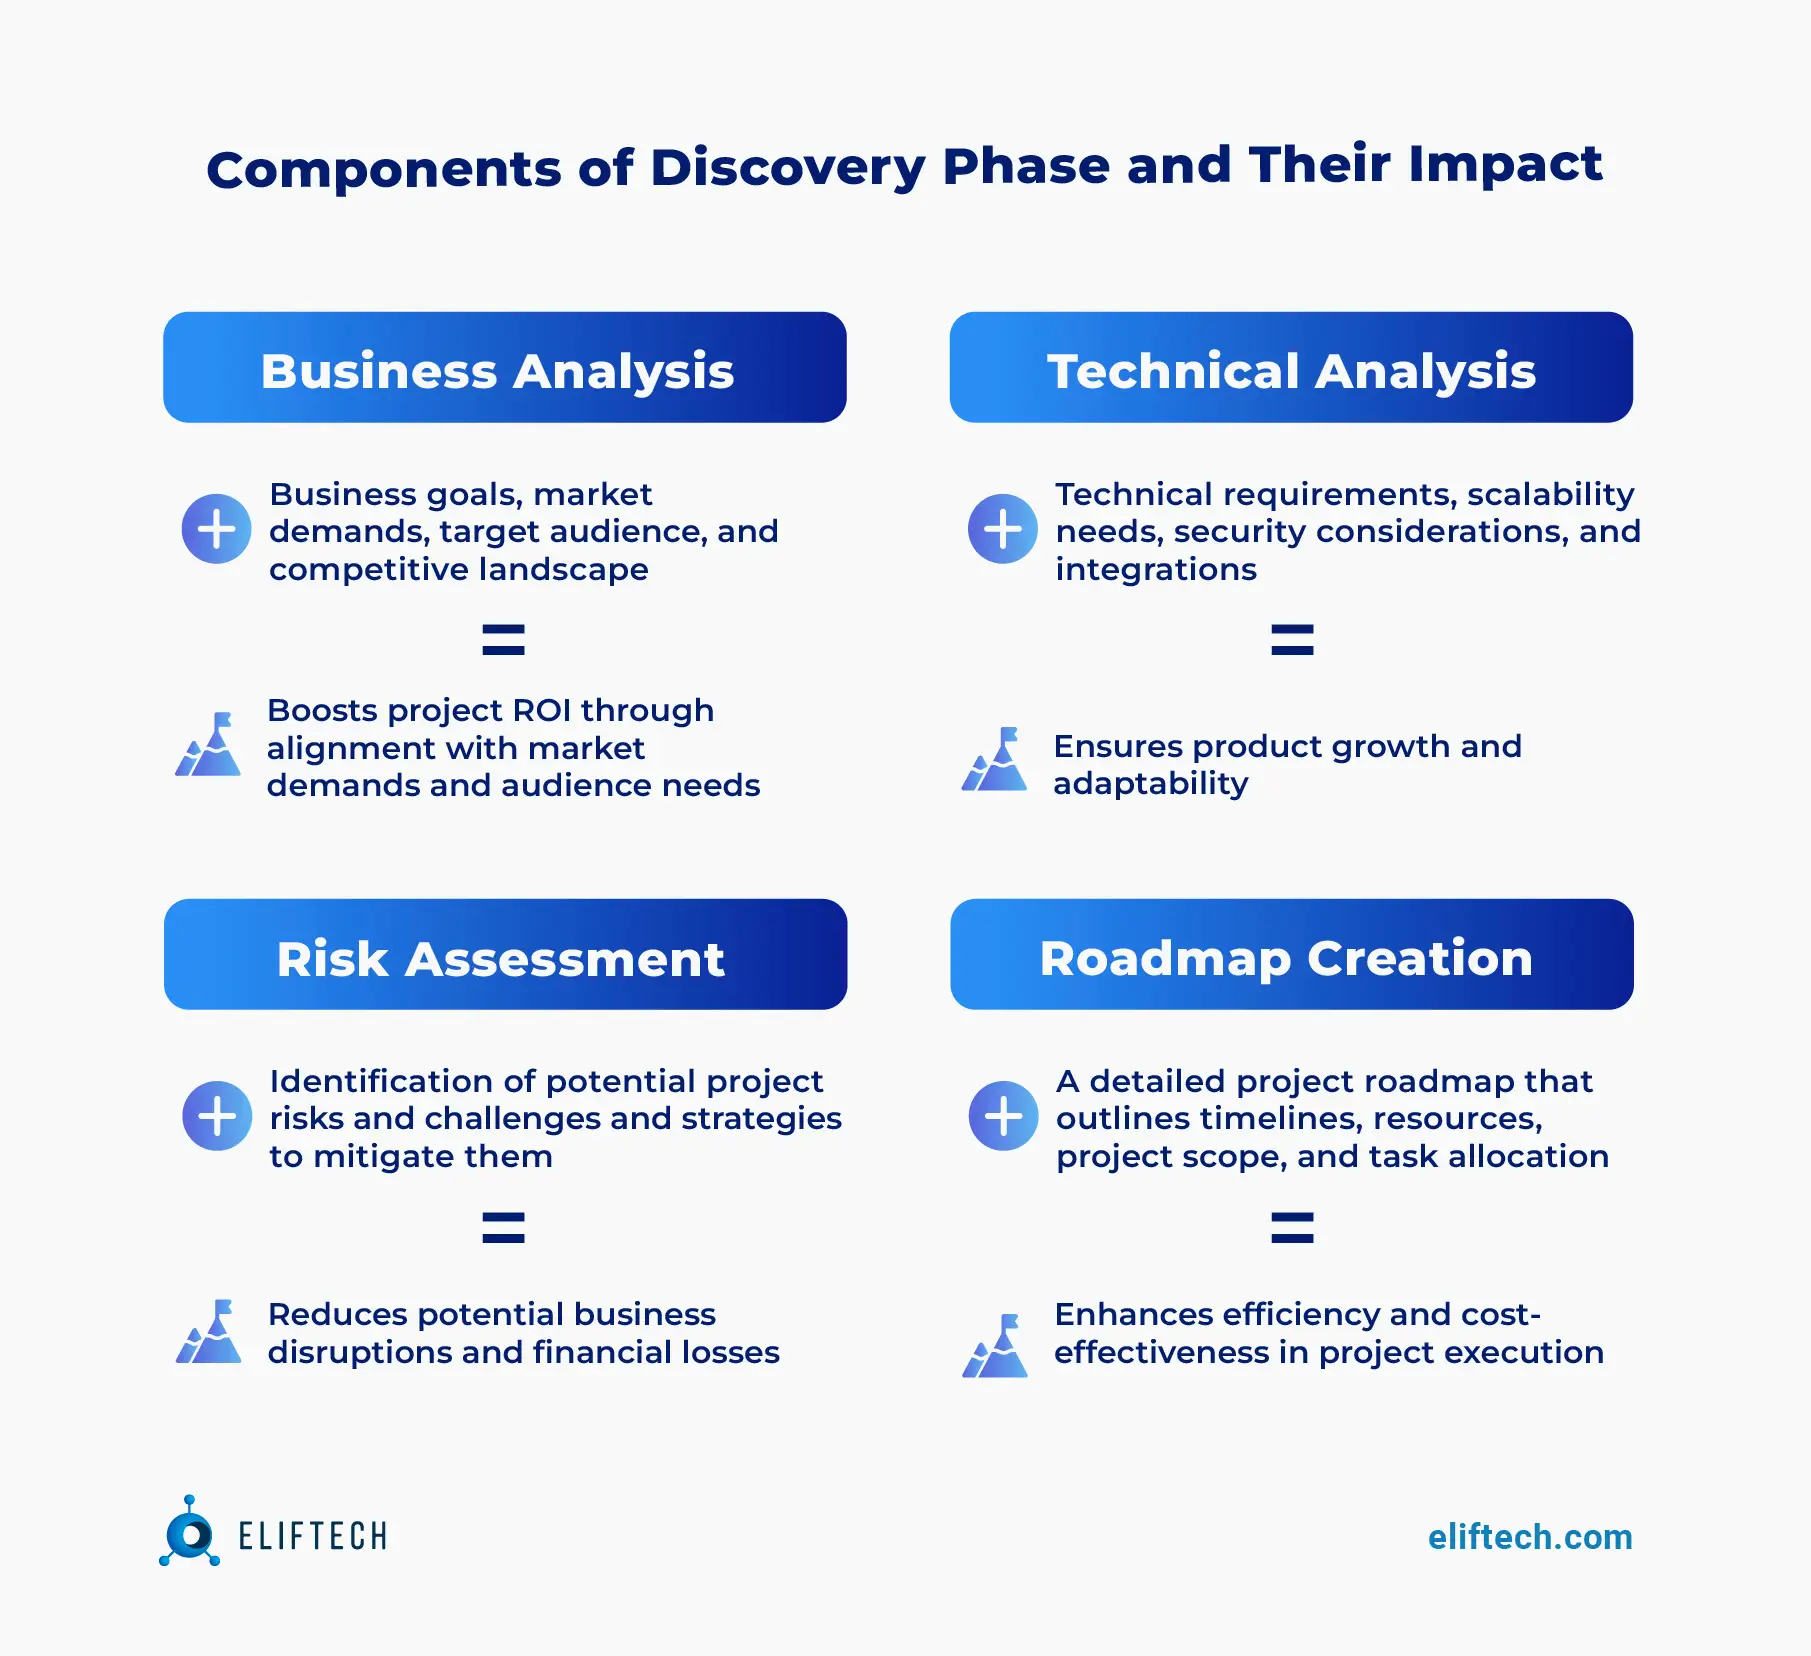 Components of Discovery Phase